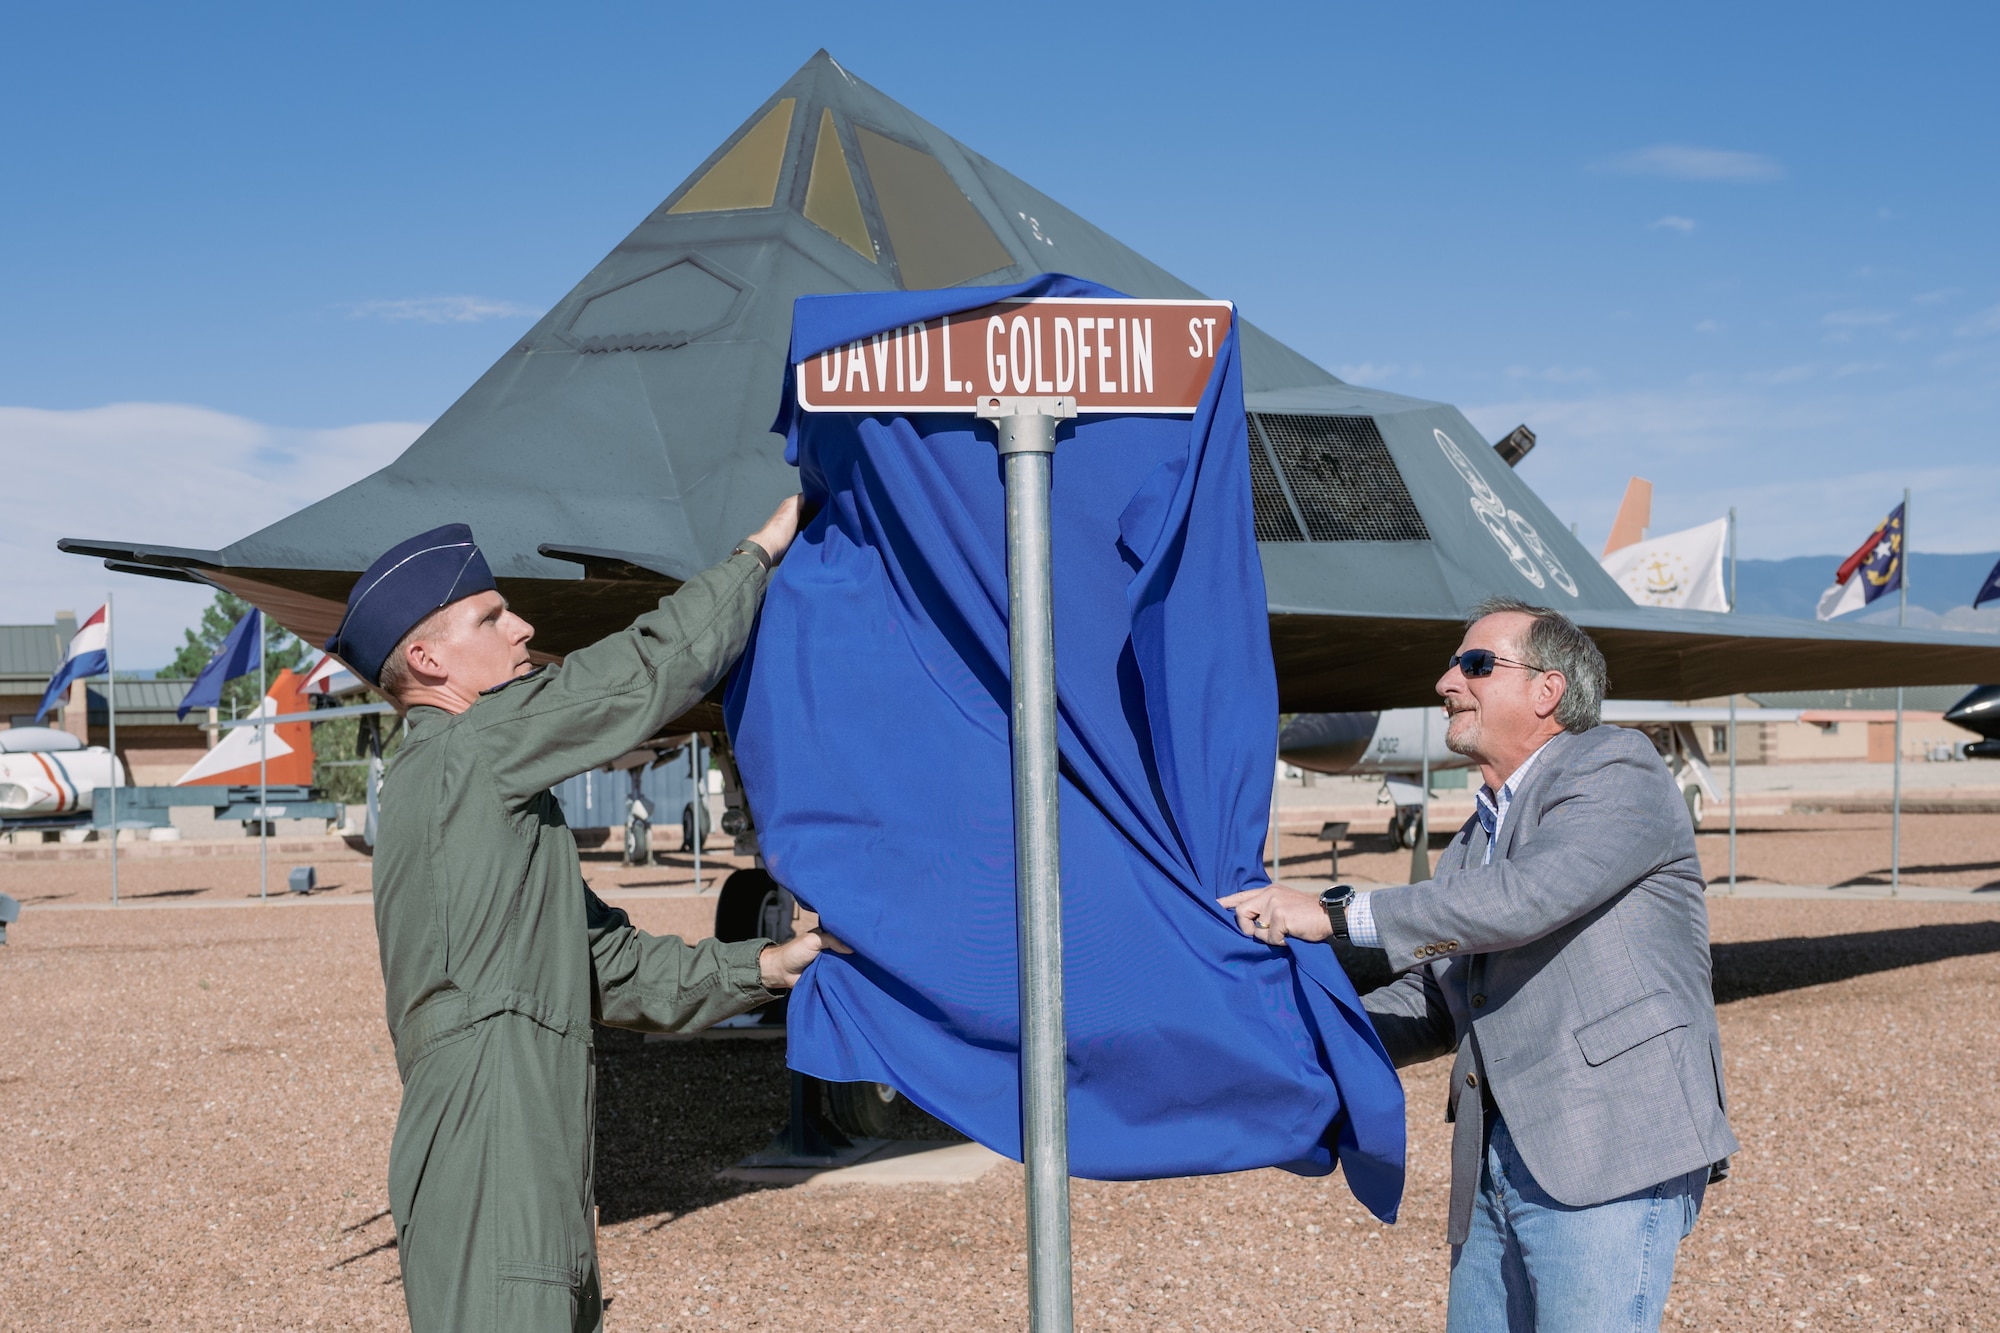 Retired U.S. Air Force Gen. David L. Goldfein, right, and U.S. Air Force Col. Justin Spears, 49th Wing commander, unveil a new street sign at Holloman Air Force Base, New Mexico, Sept. 22, 2023. Goldfein took command of the 49th Fighter Wing in 2006, where he served the men and women of Holloman before he continued on to serve as chief of staff of the Air Force. (U.S. Air Force photo by Senior Airman Antonio Salfran)